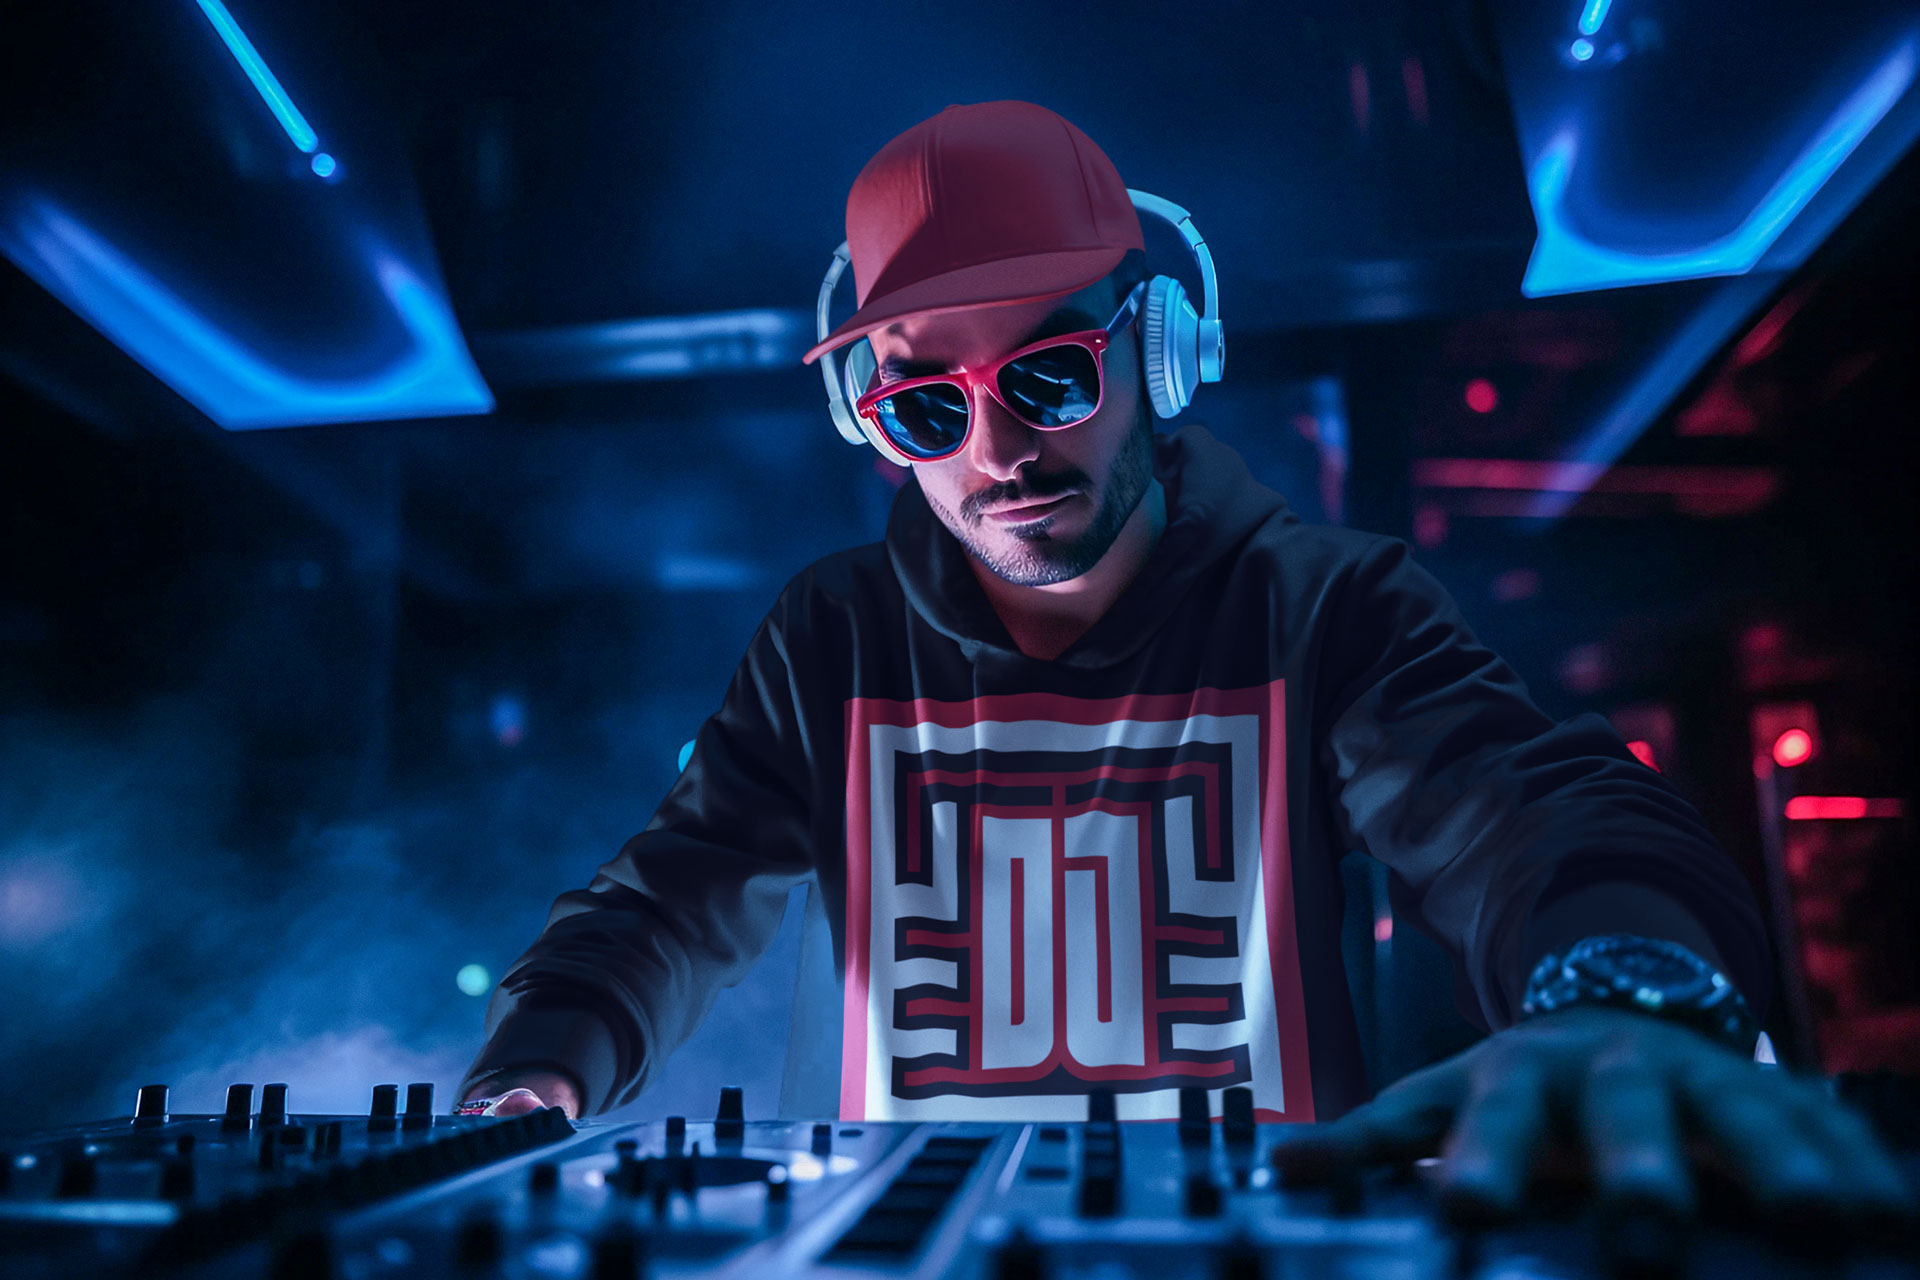 ai-generated-mockup-featuring-a-dj-wearing-a-hoodie-at-a-night-club-m36398